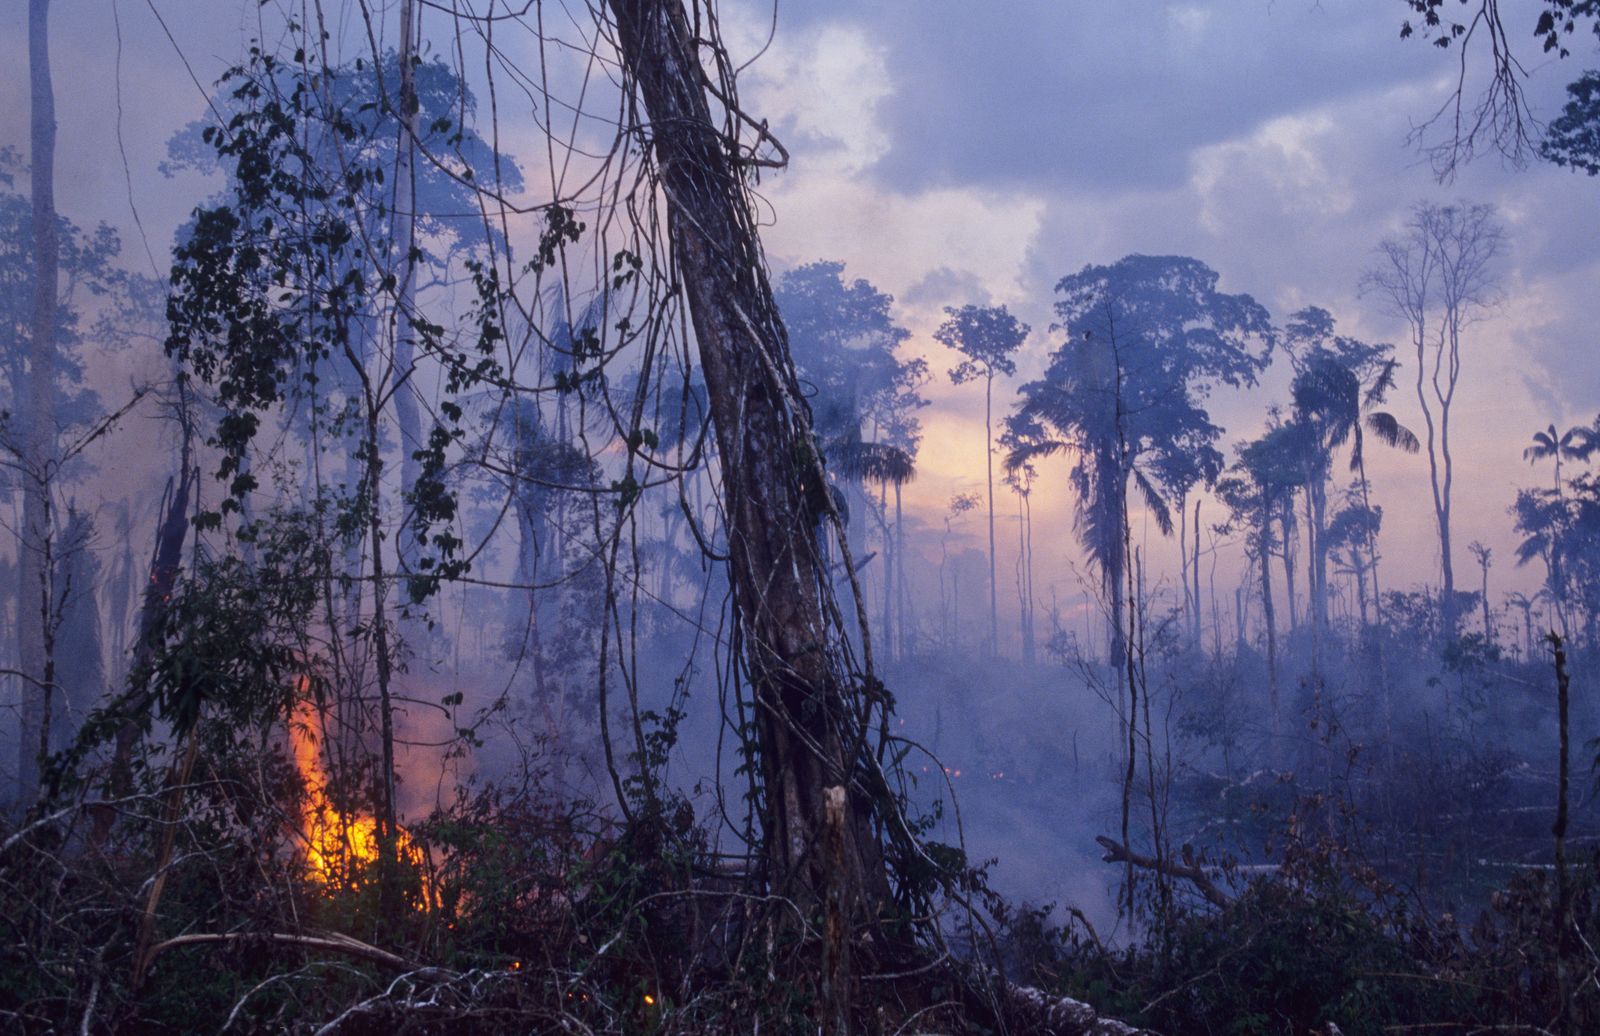 The Amazon Rainforest Now Emits More Greenhouse Gases Than It Absorbs |  Smart News| Smithsonian Magazine